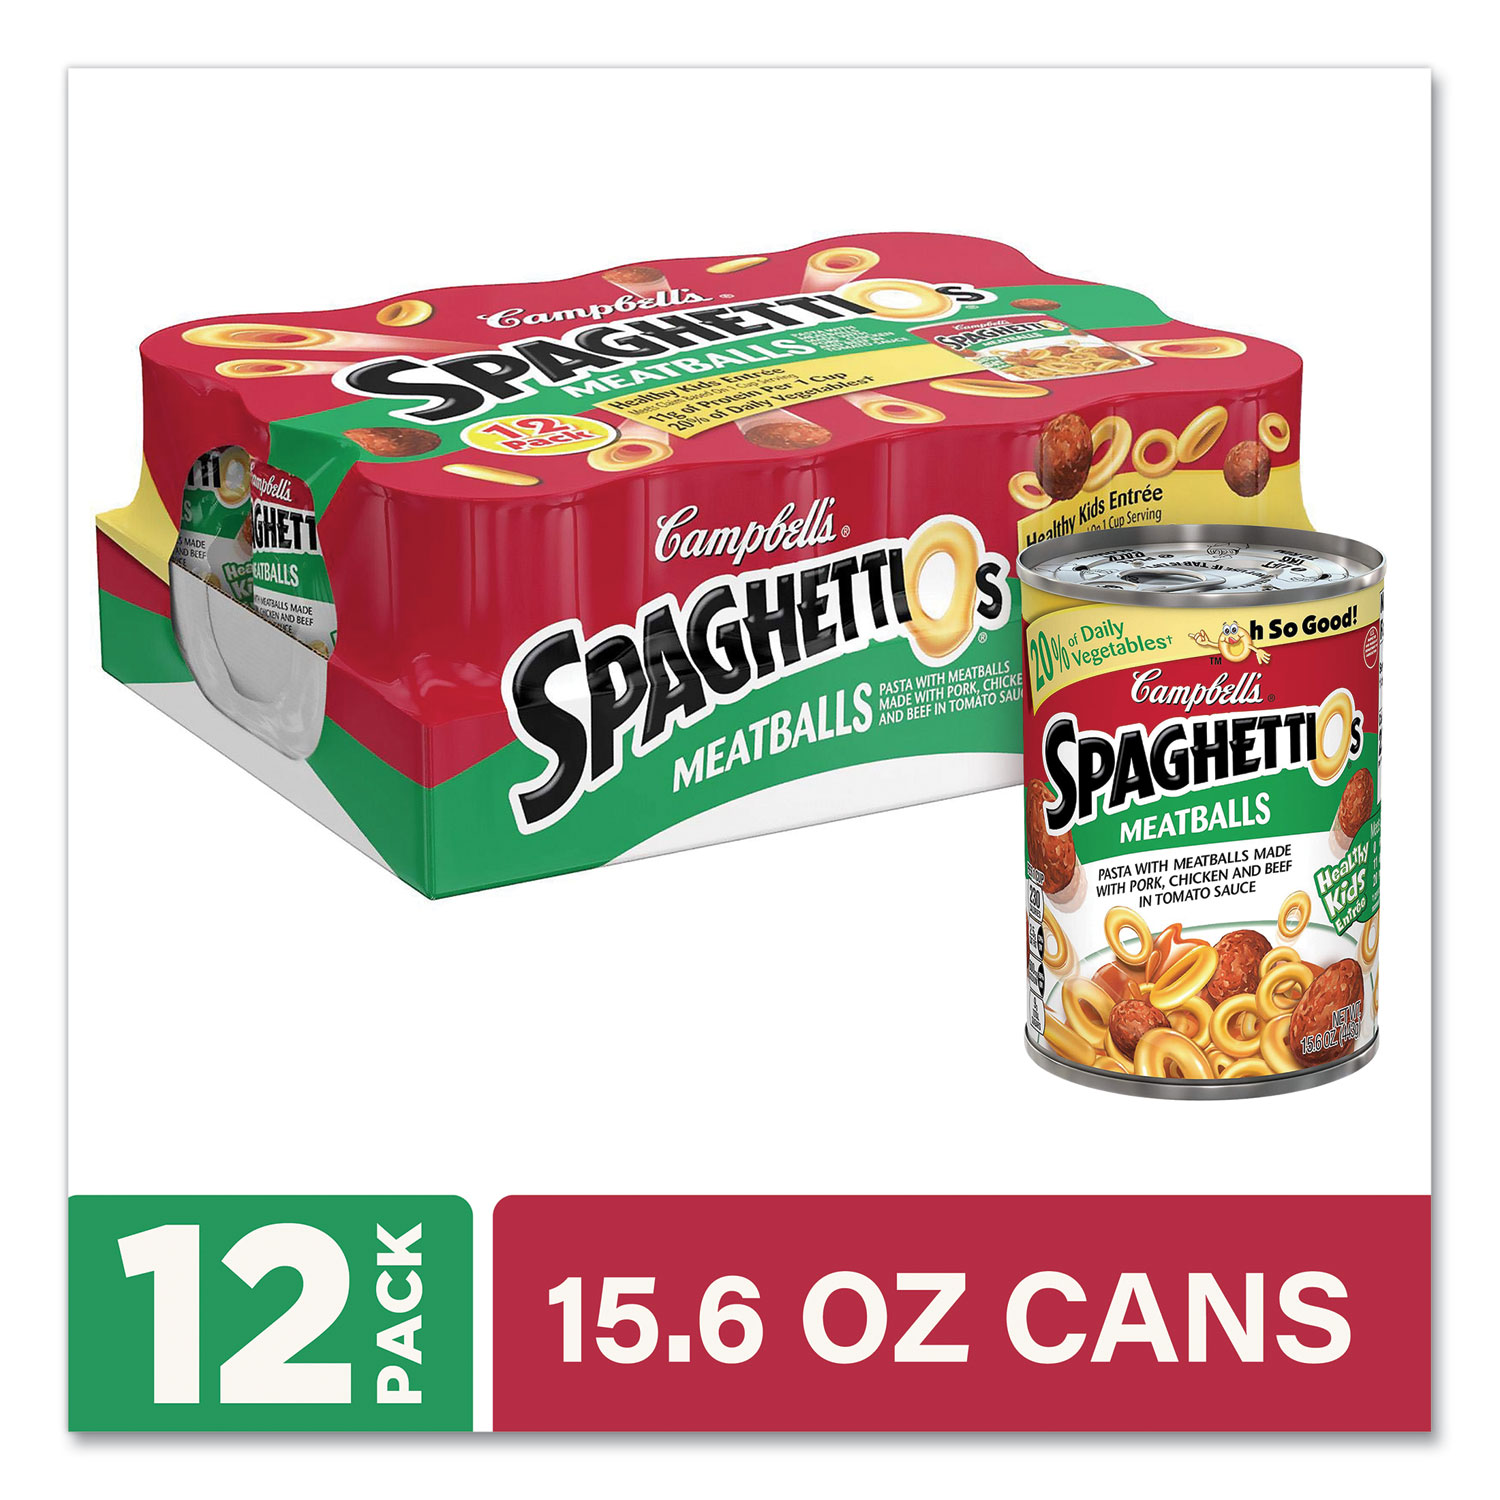  SpaghettiO's 15275 Canned Pasta with Meatballs, 15.6 oz Can, 12/Pack, Free Delivery in 1-4 Business Days (GRR22001151) 